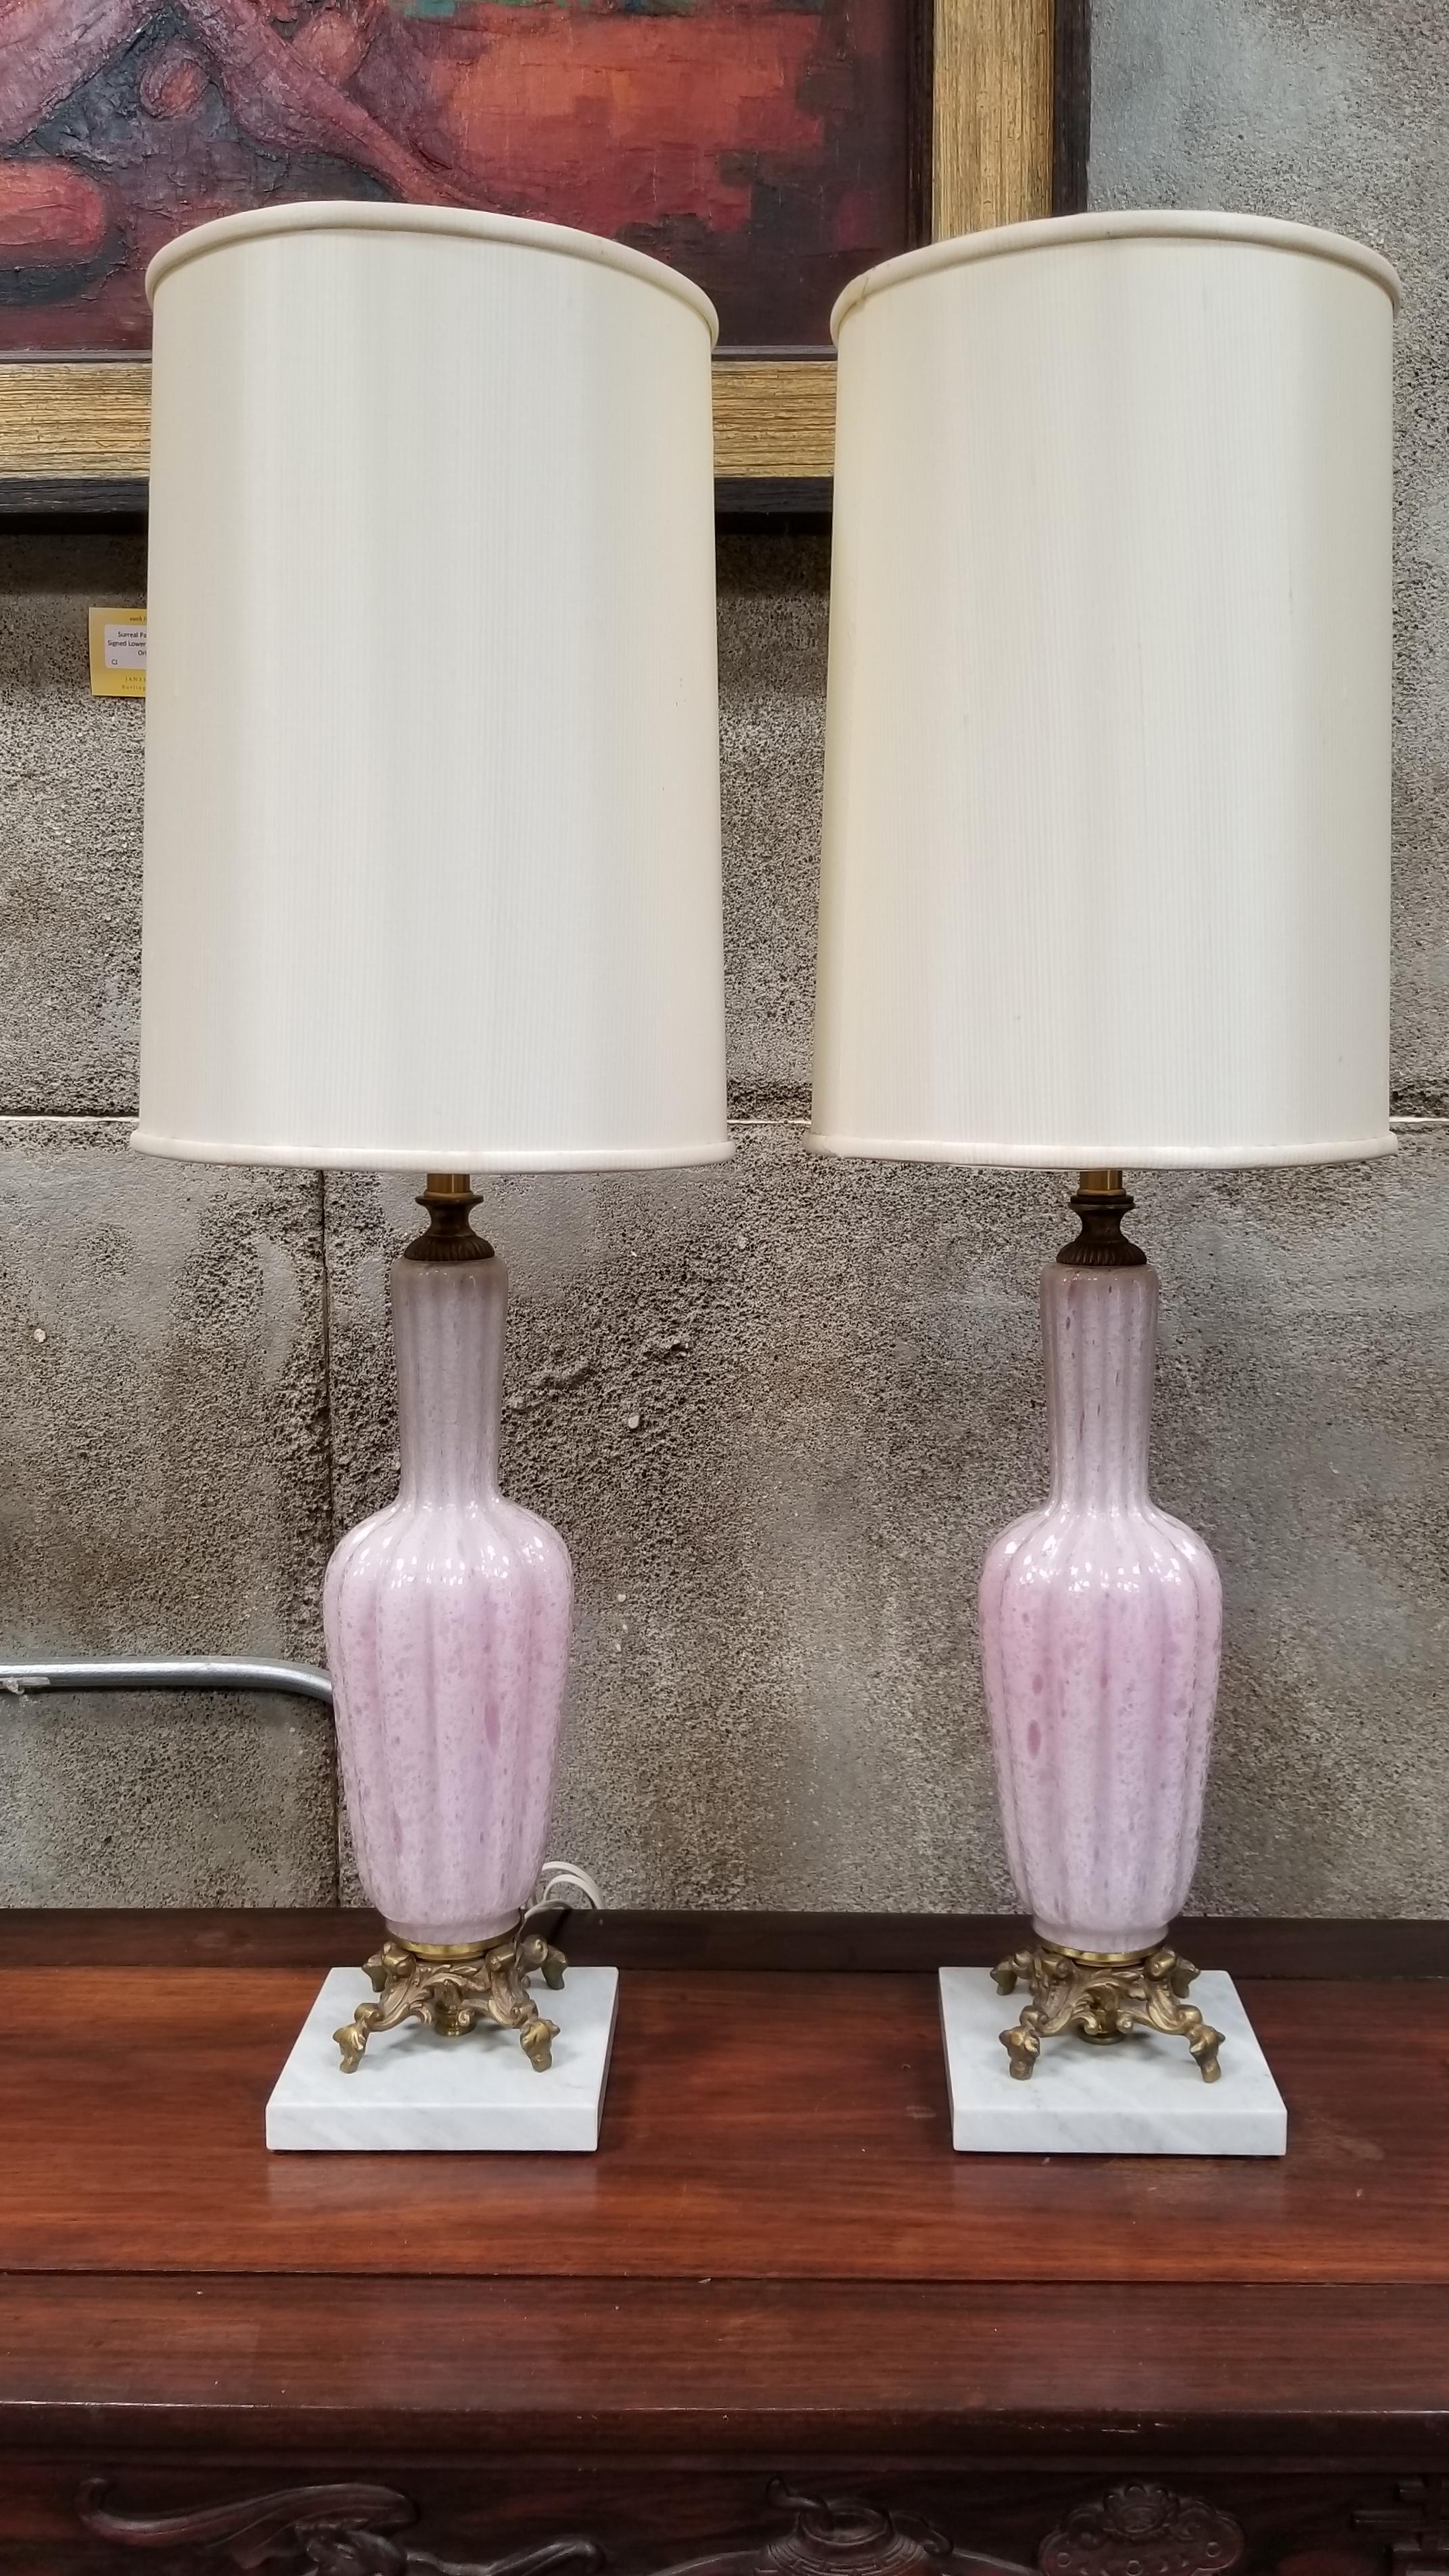 Diminutive pair of opalescent Murano glass table lamps with exceptional, detailed brass mounts and marble bases. Unusual smaller size allows use in space restricted applications. Original, vintage lamp shades. Excellent, original condition. Marble